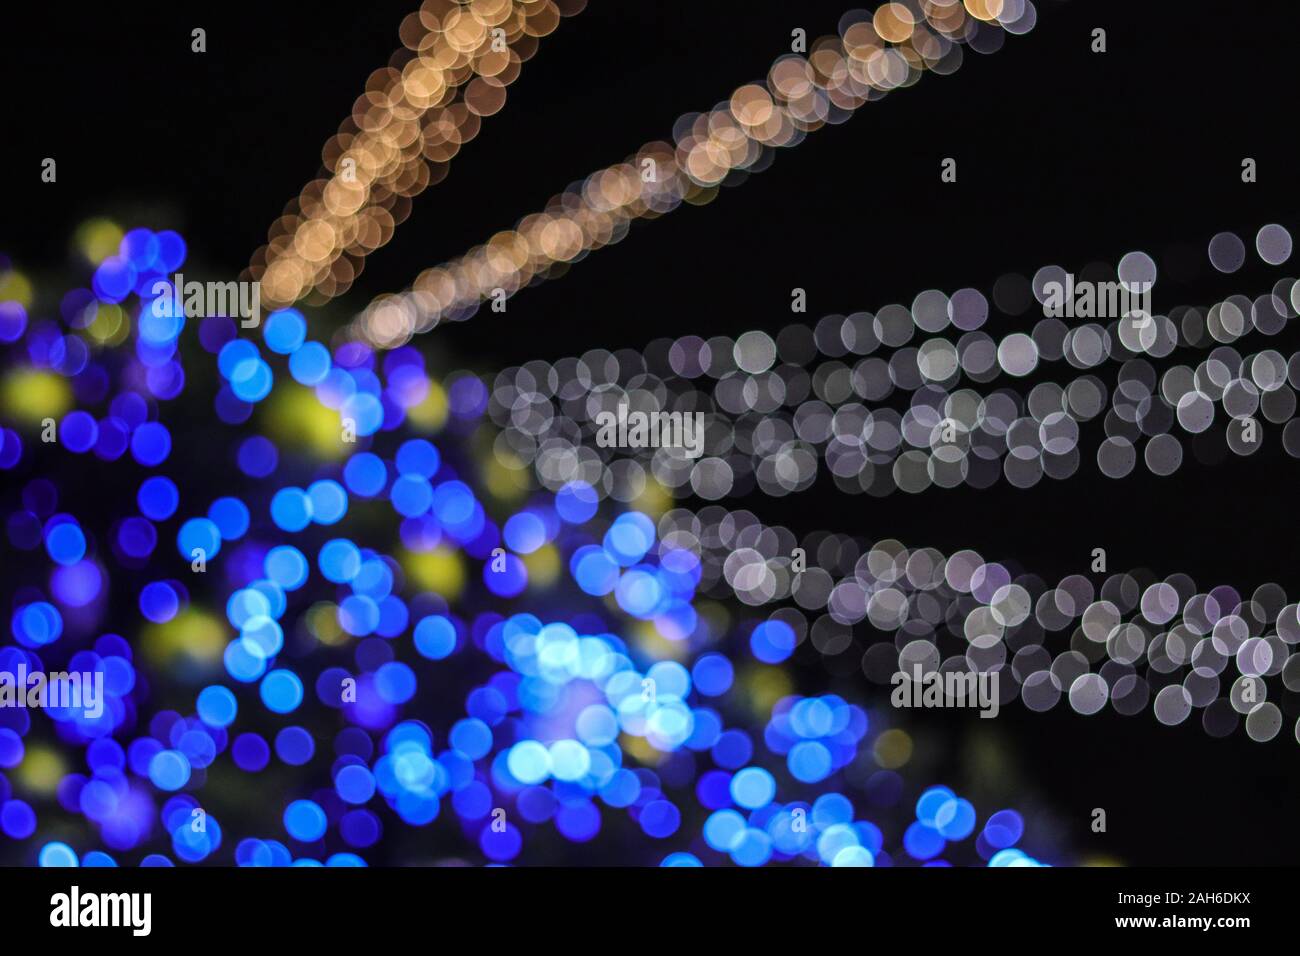 Abstract christmas tree bokeh lights of classic blue and white color blur background. Stock Photo